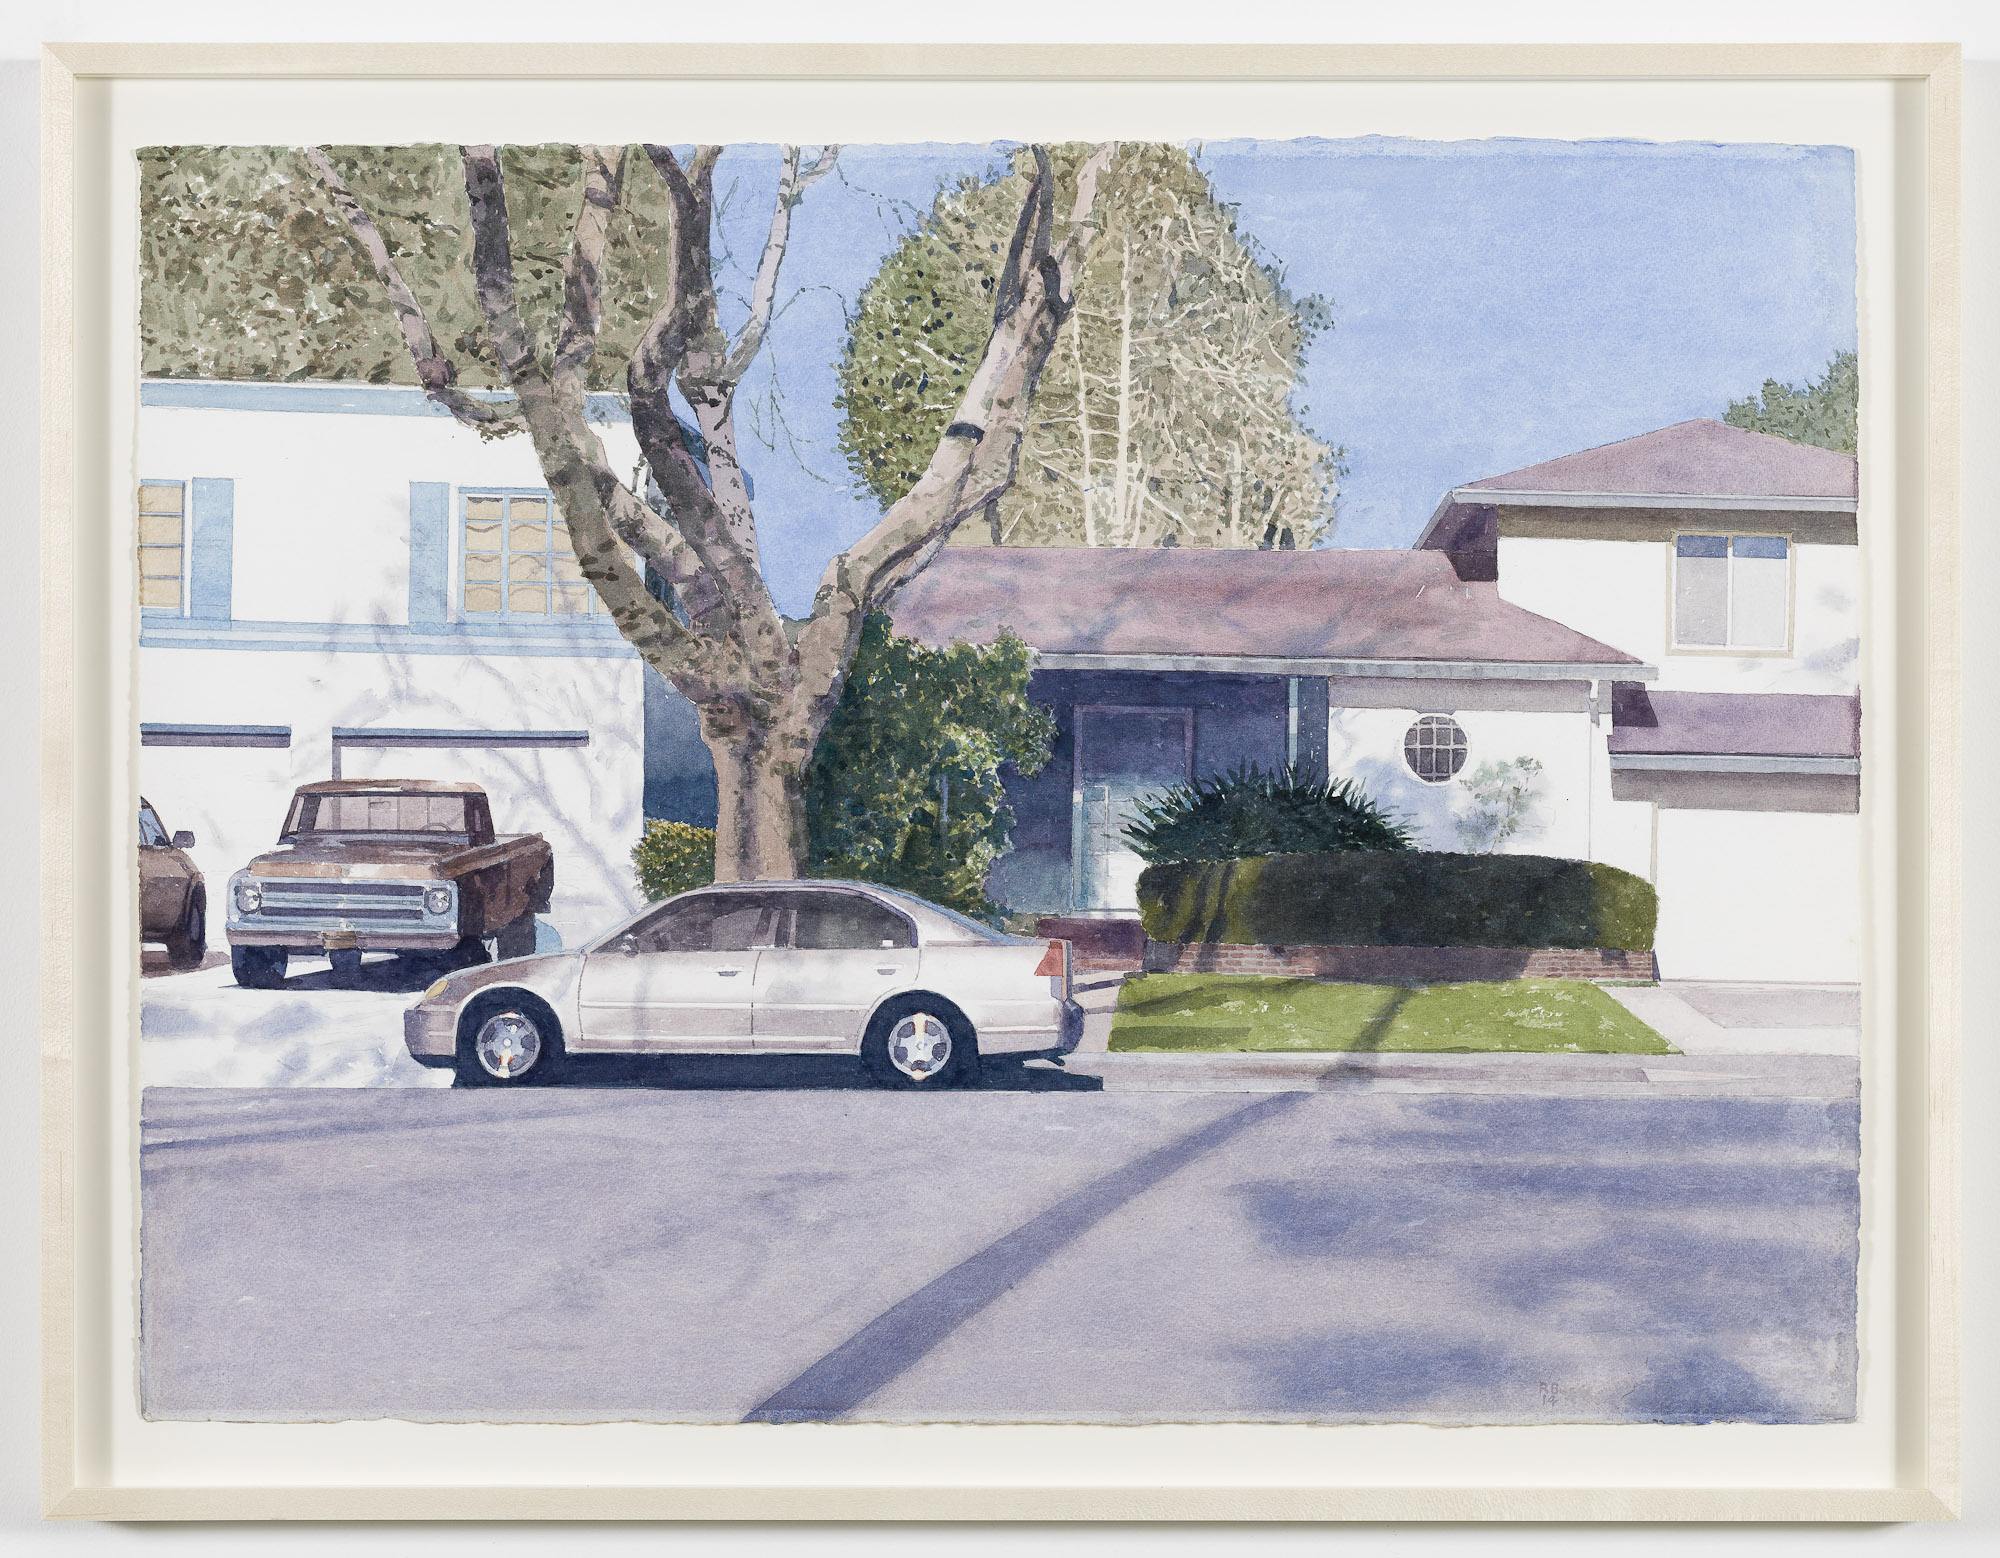 Robert Bechtle, <i>Central Ave - Alameda</i>, 2014, Watercolor on paper, 22 3/8 x 30 1/8 inches (56.8 x 76.5 cm)